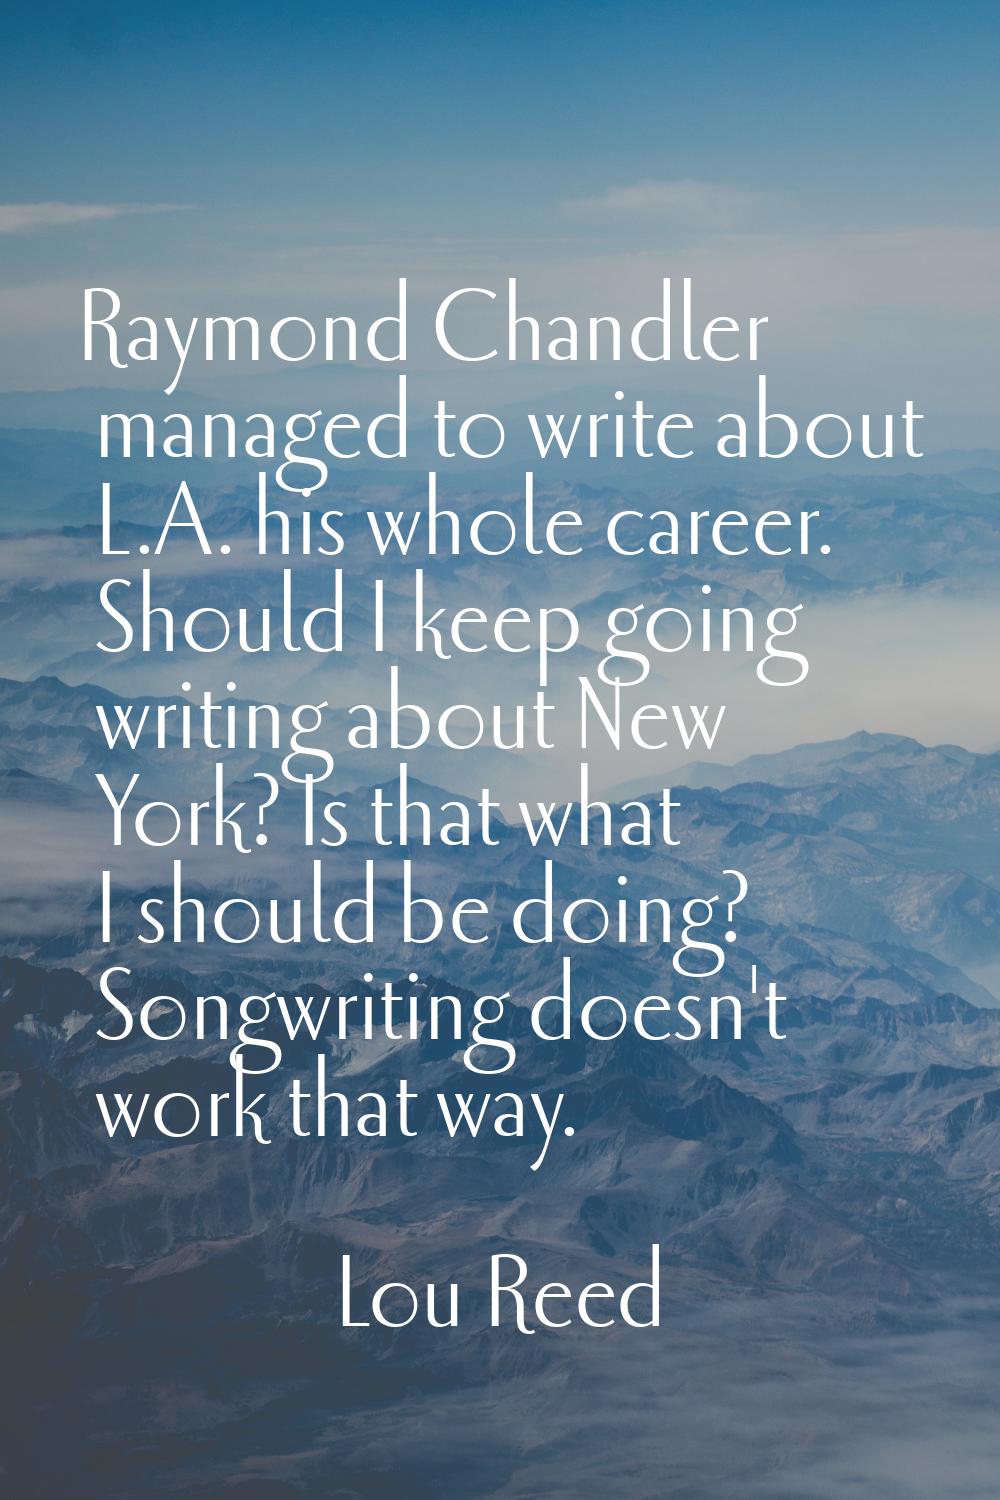 Raymond Chandler managed to write about L.A. his whole career. Should I keep going writing about Ne